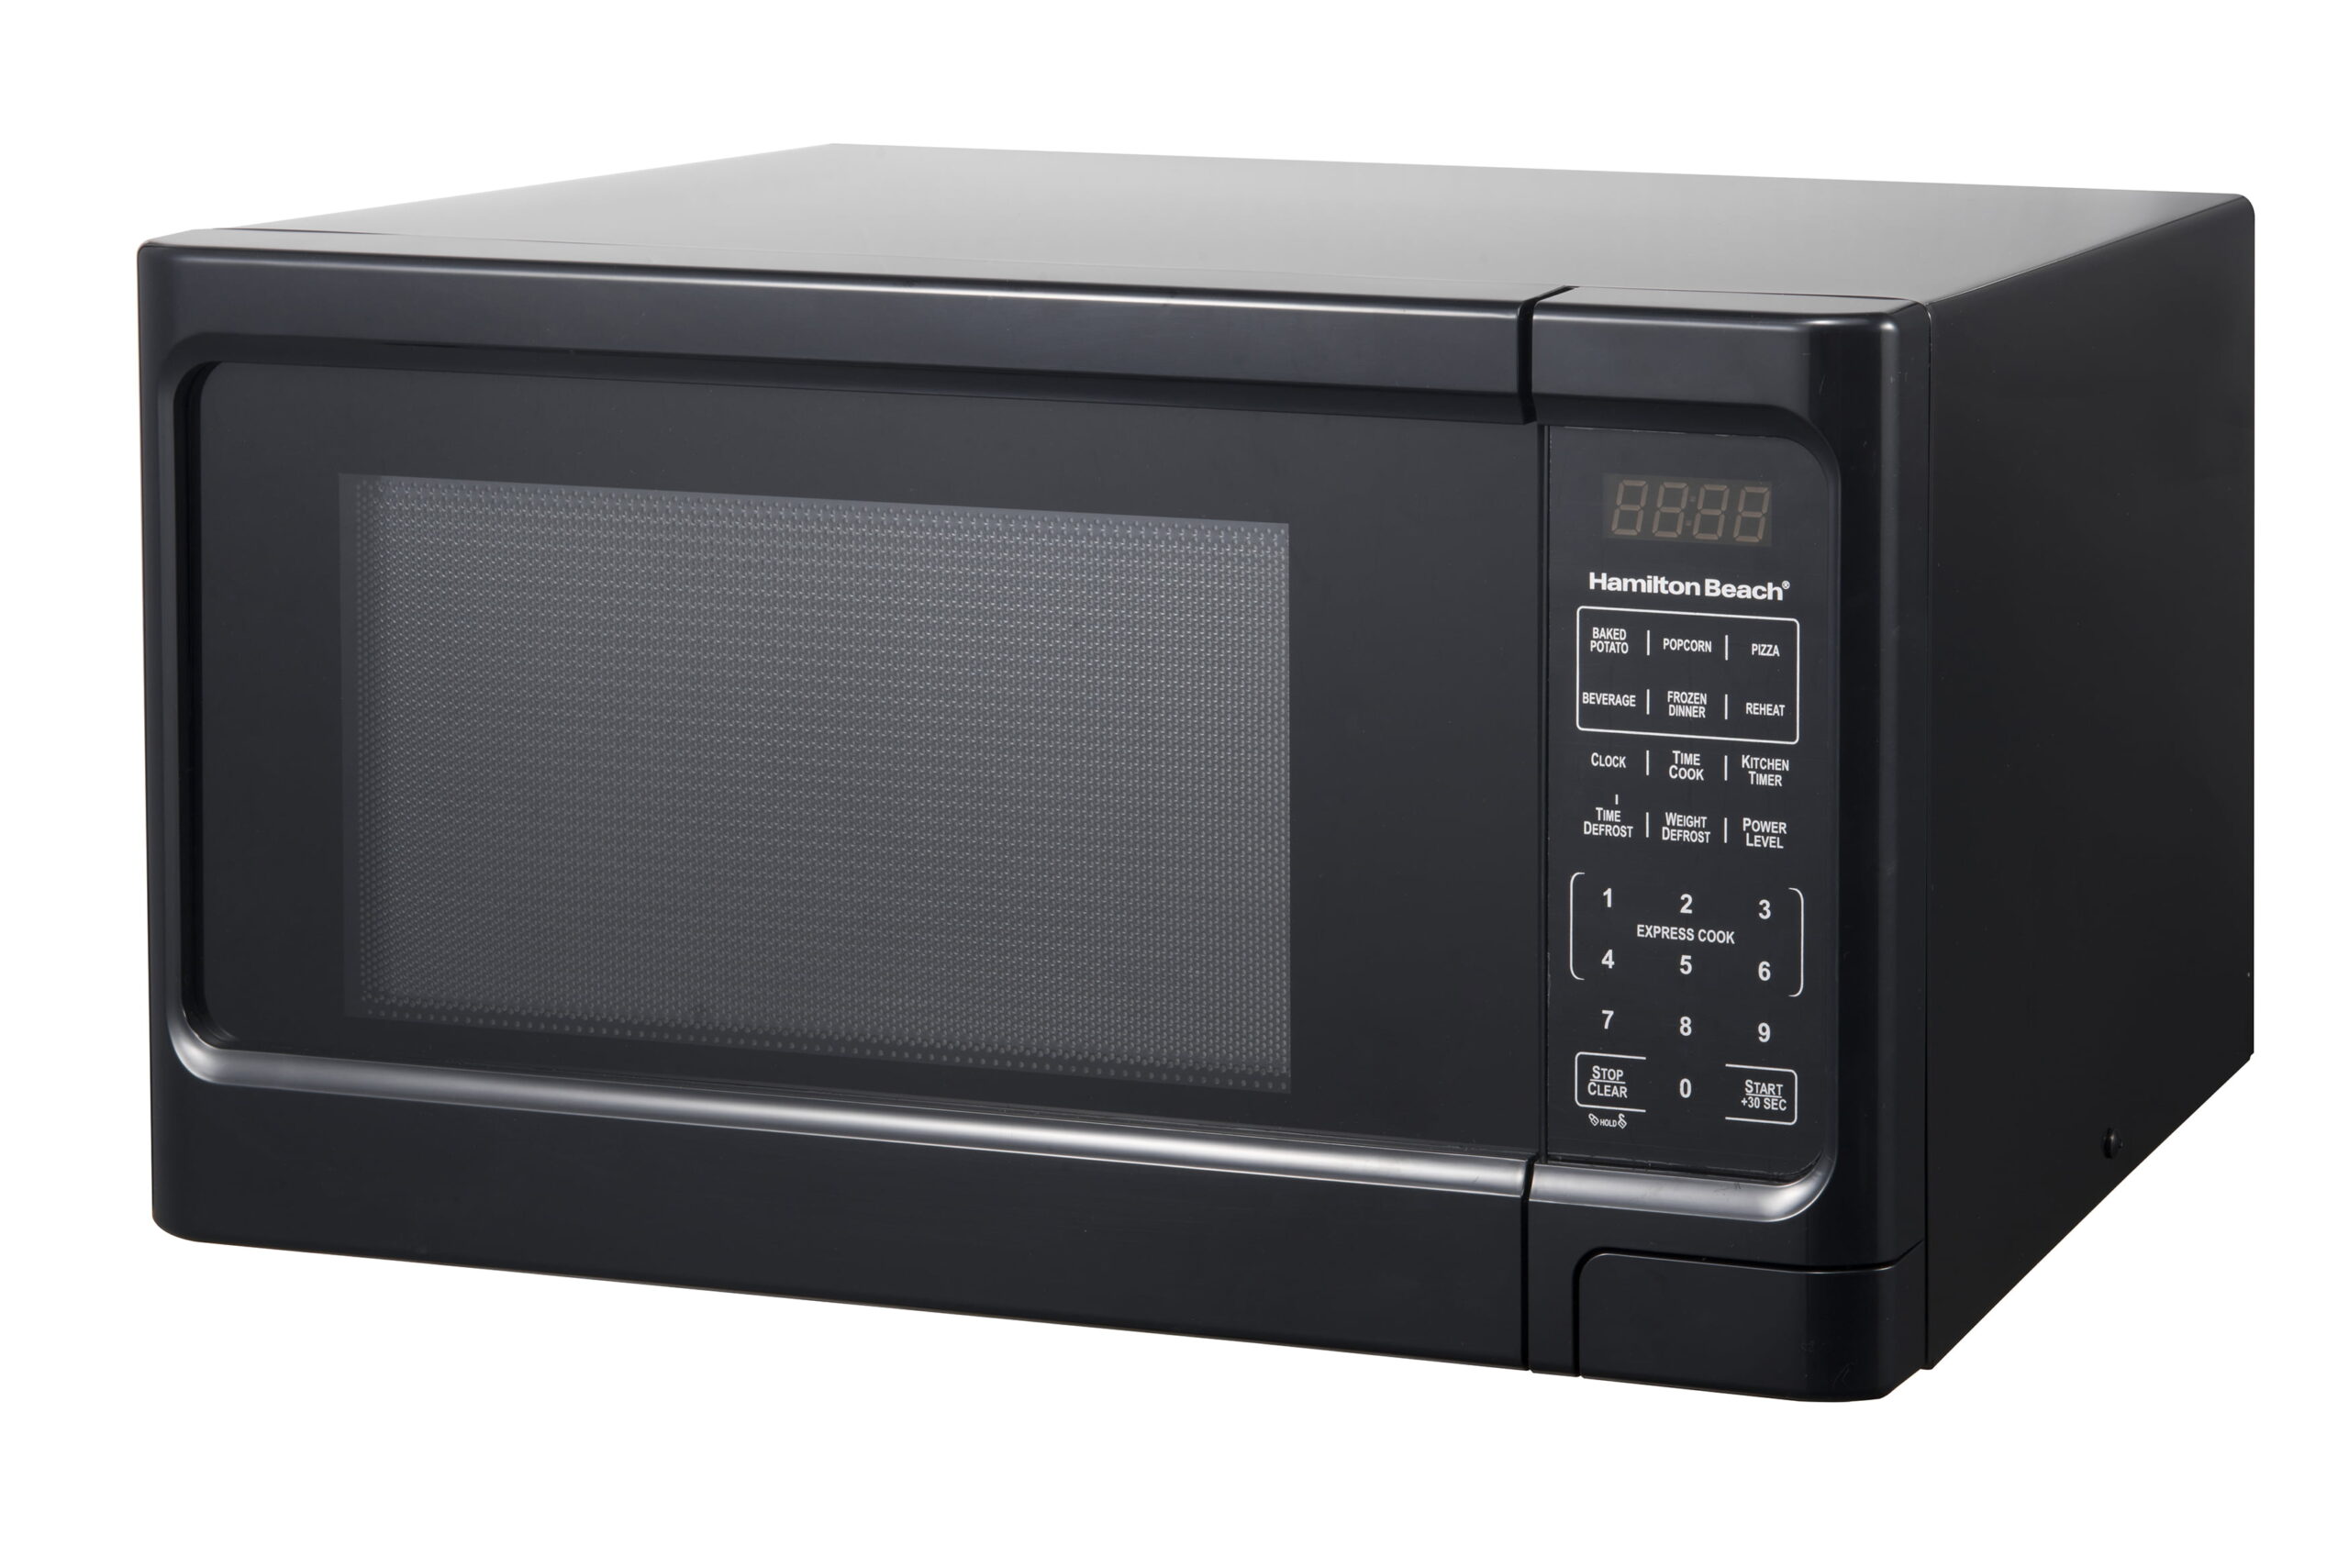 Hamilton Beach 1.1 cu ft Countertop Microwave Oven in Stainless